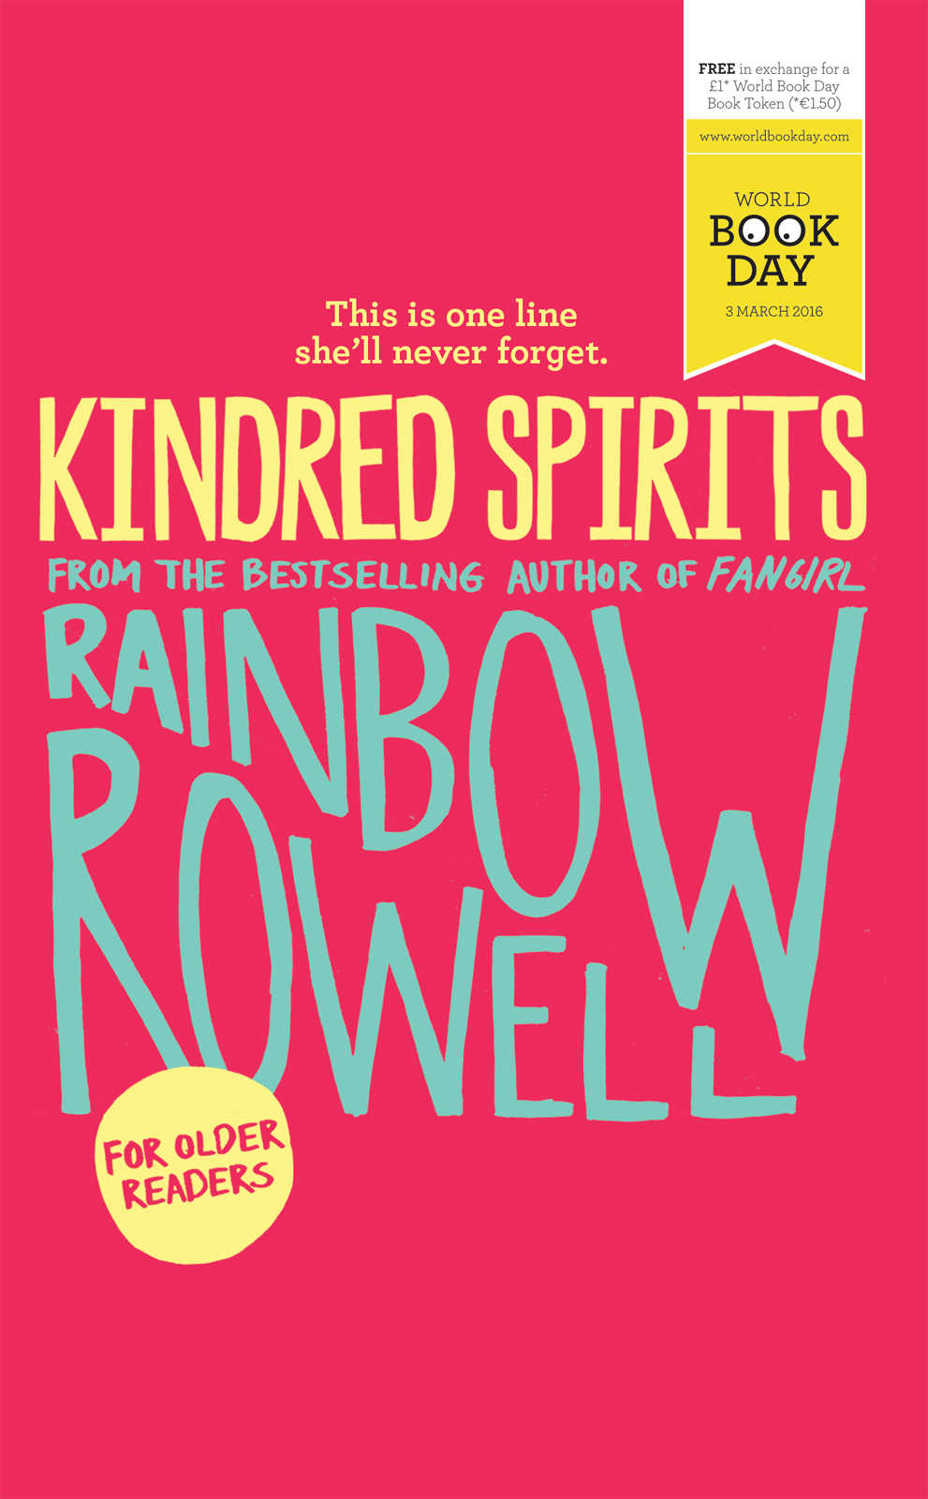 Kindred Spirits by Rainbow Rowell